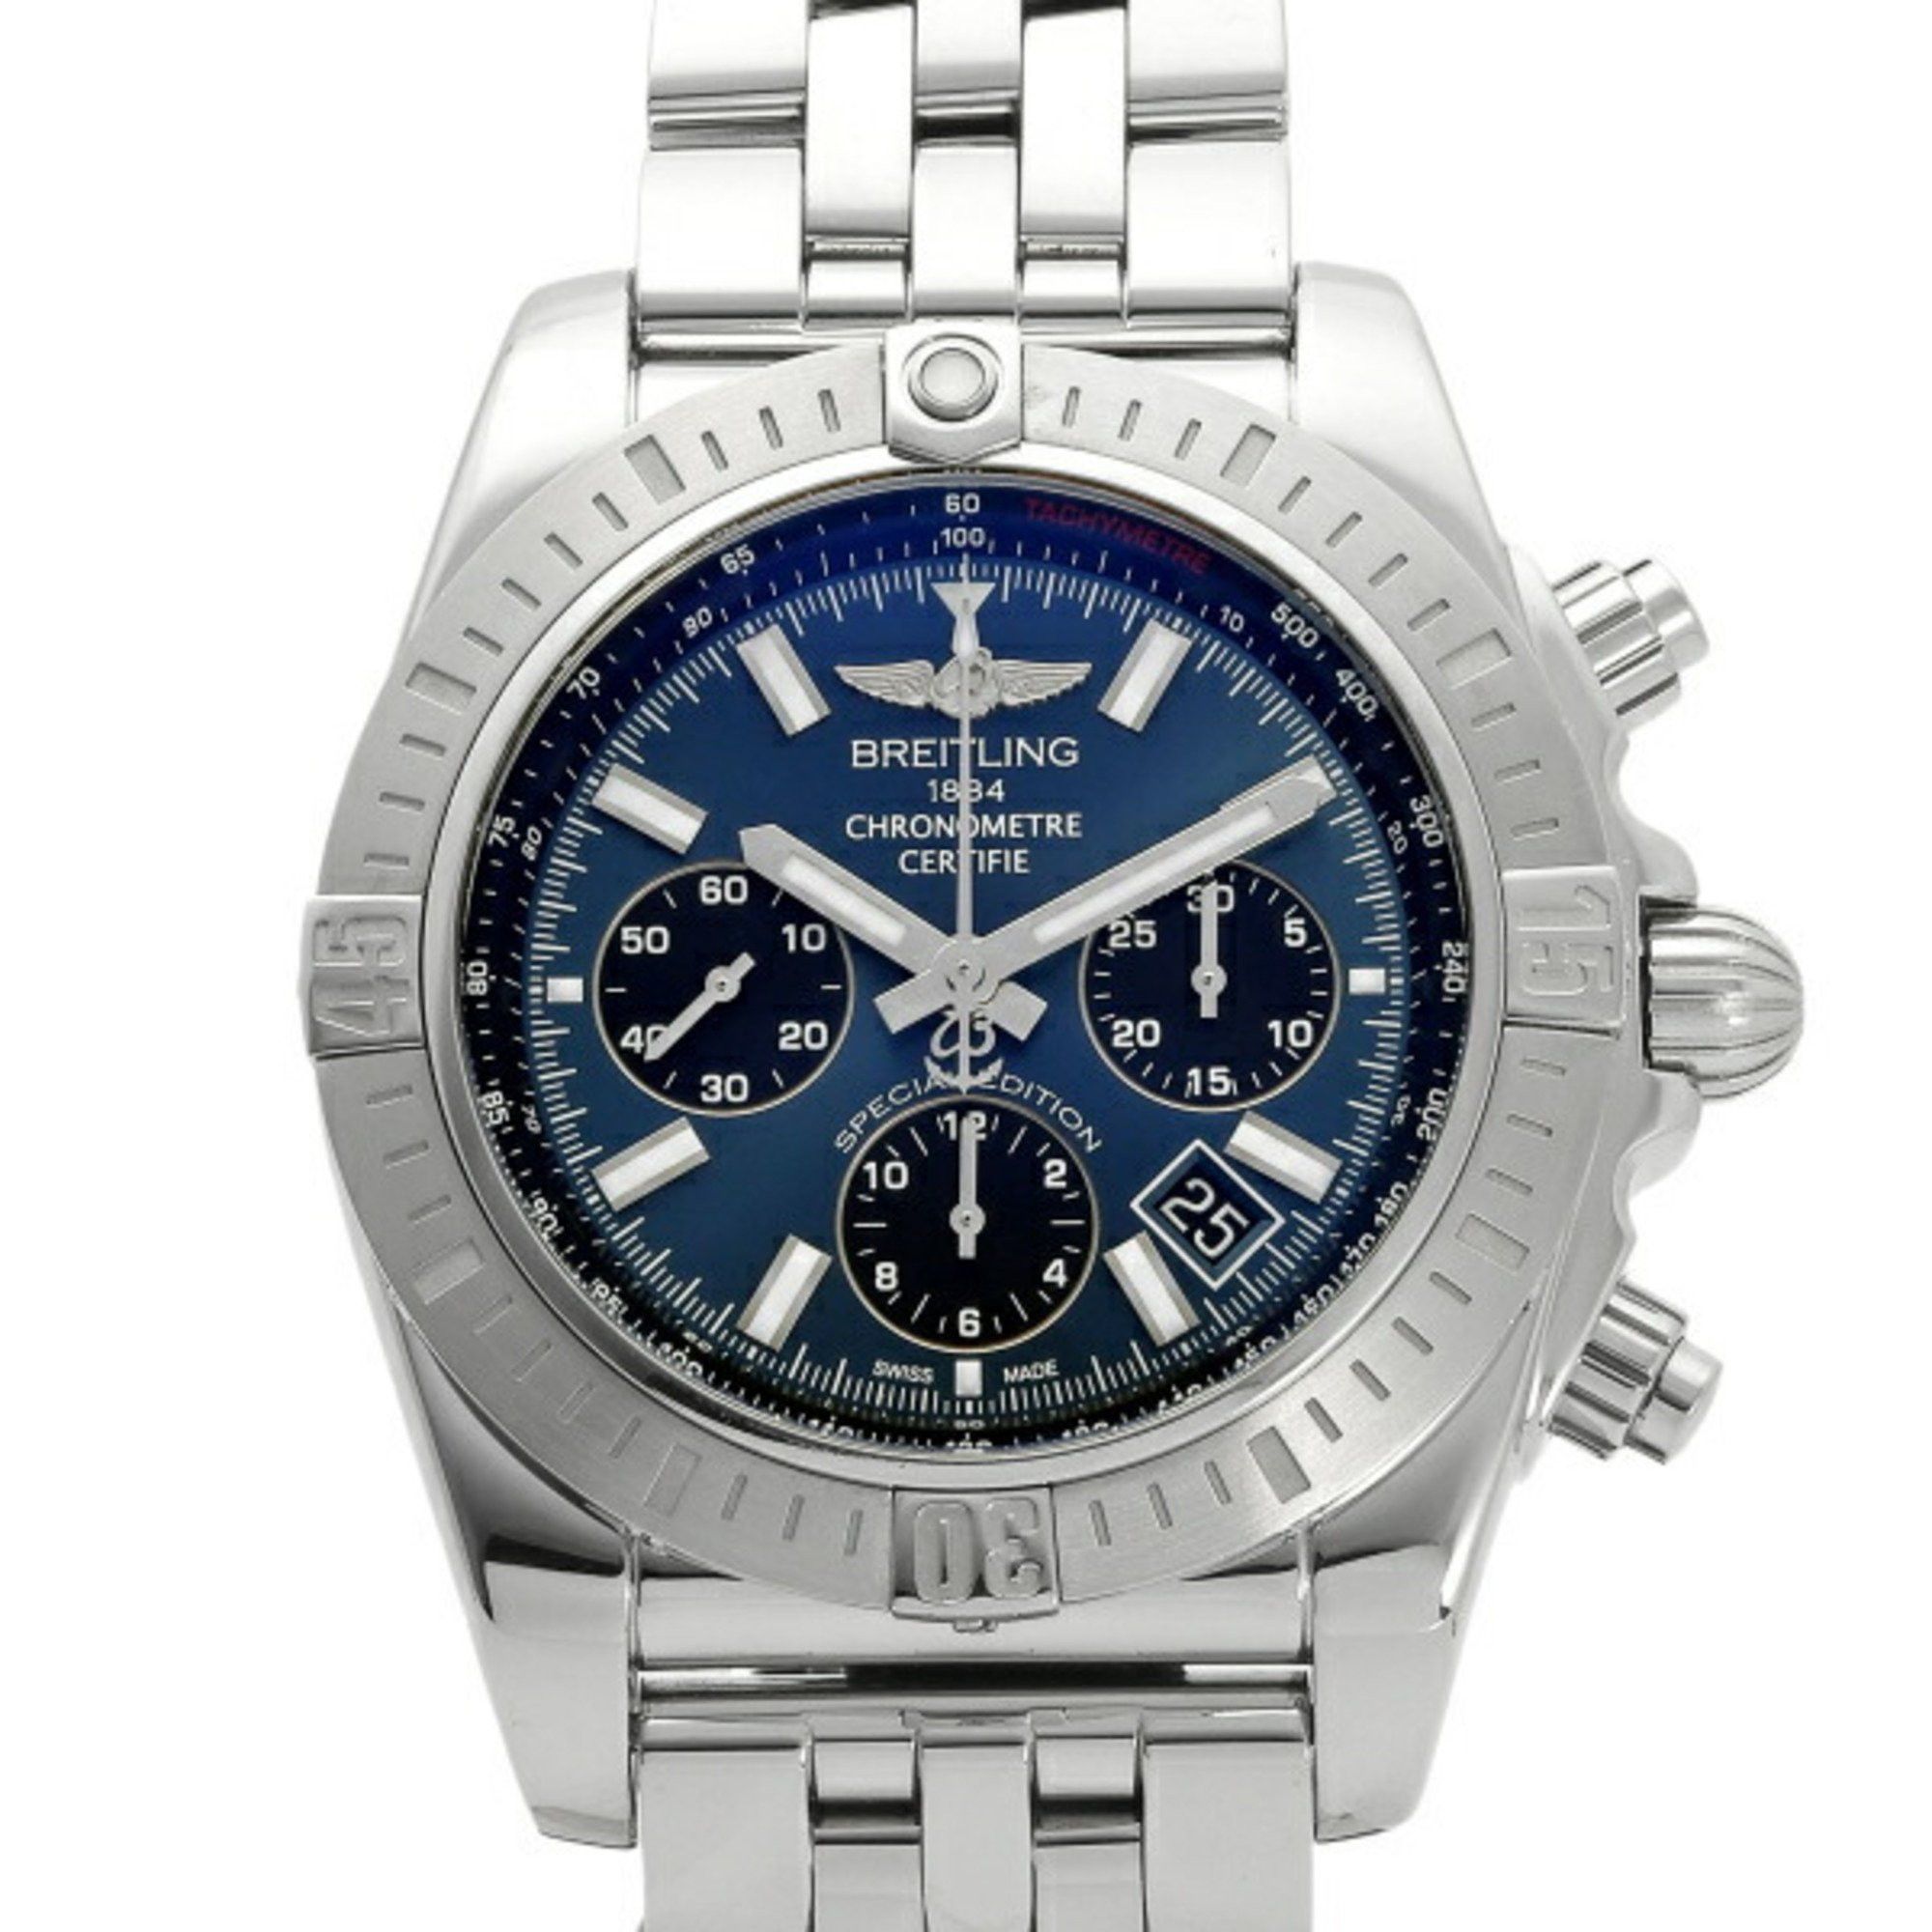 image of Breitling Chronomat 44 Jsp Japan Limited Model To 500 Pieces Ab011511/c987 Blue/black Dial Watch Me